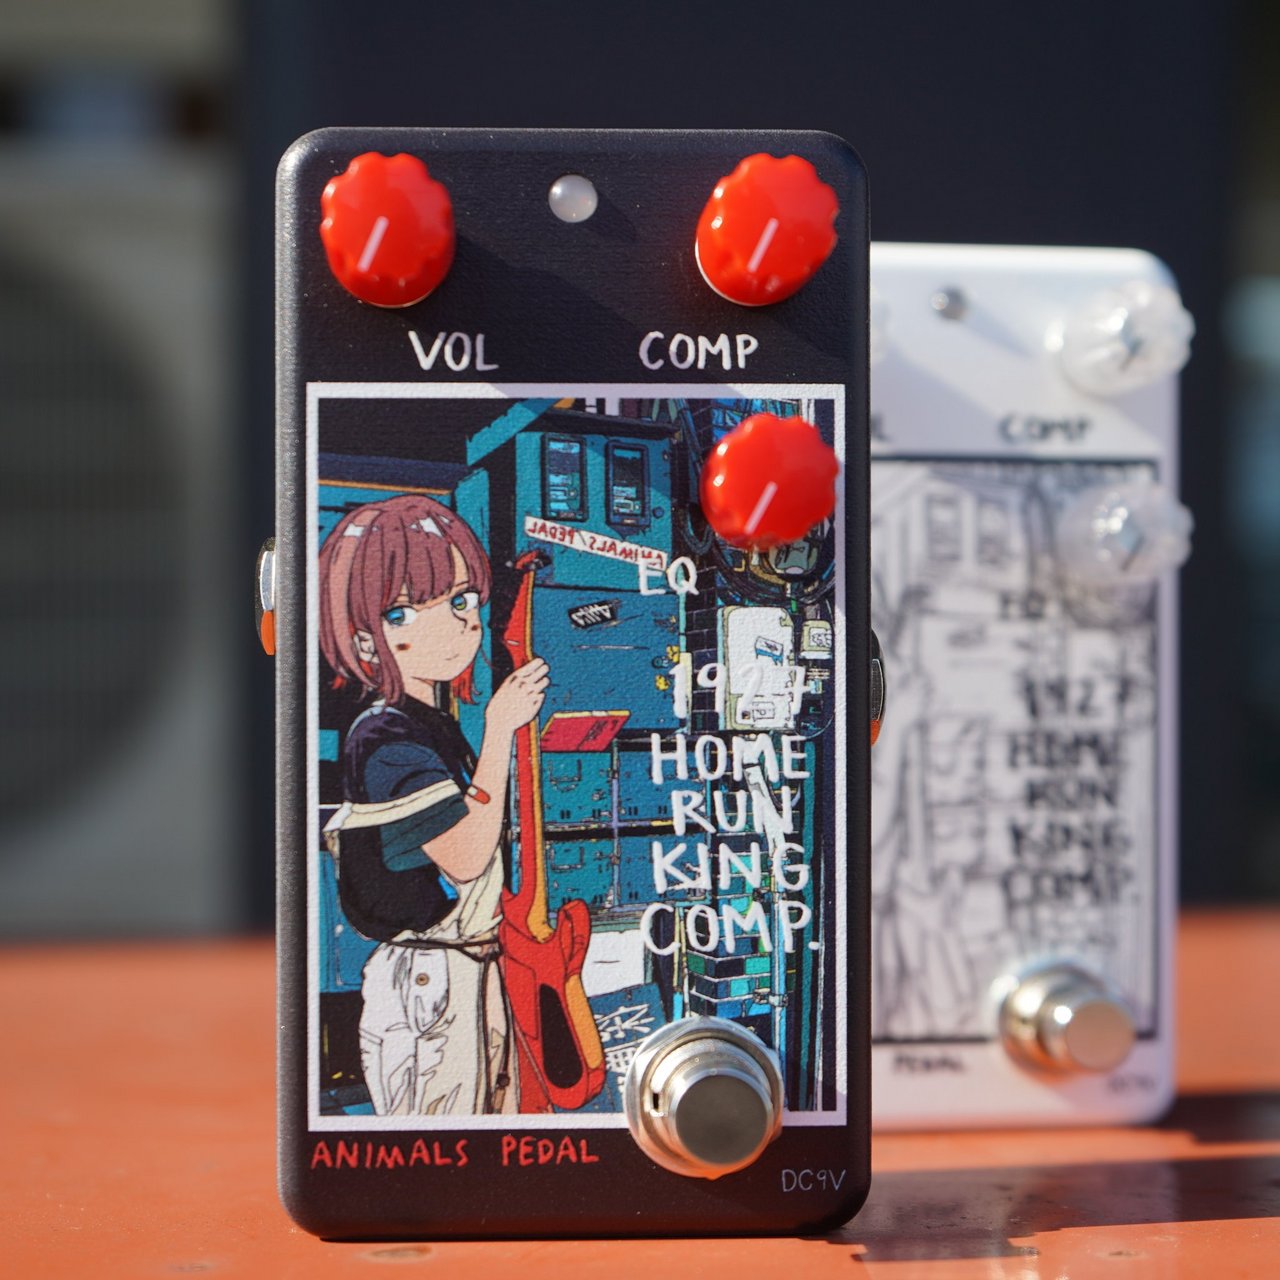 Animals Pedal Custom Illustrated 032 1927 Home Run King Comp. by